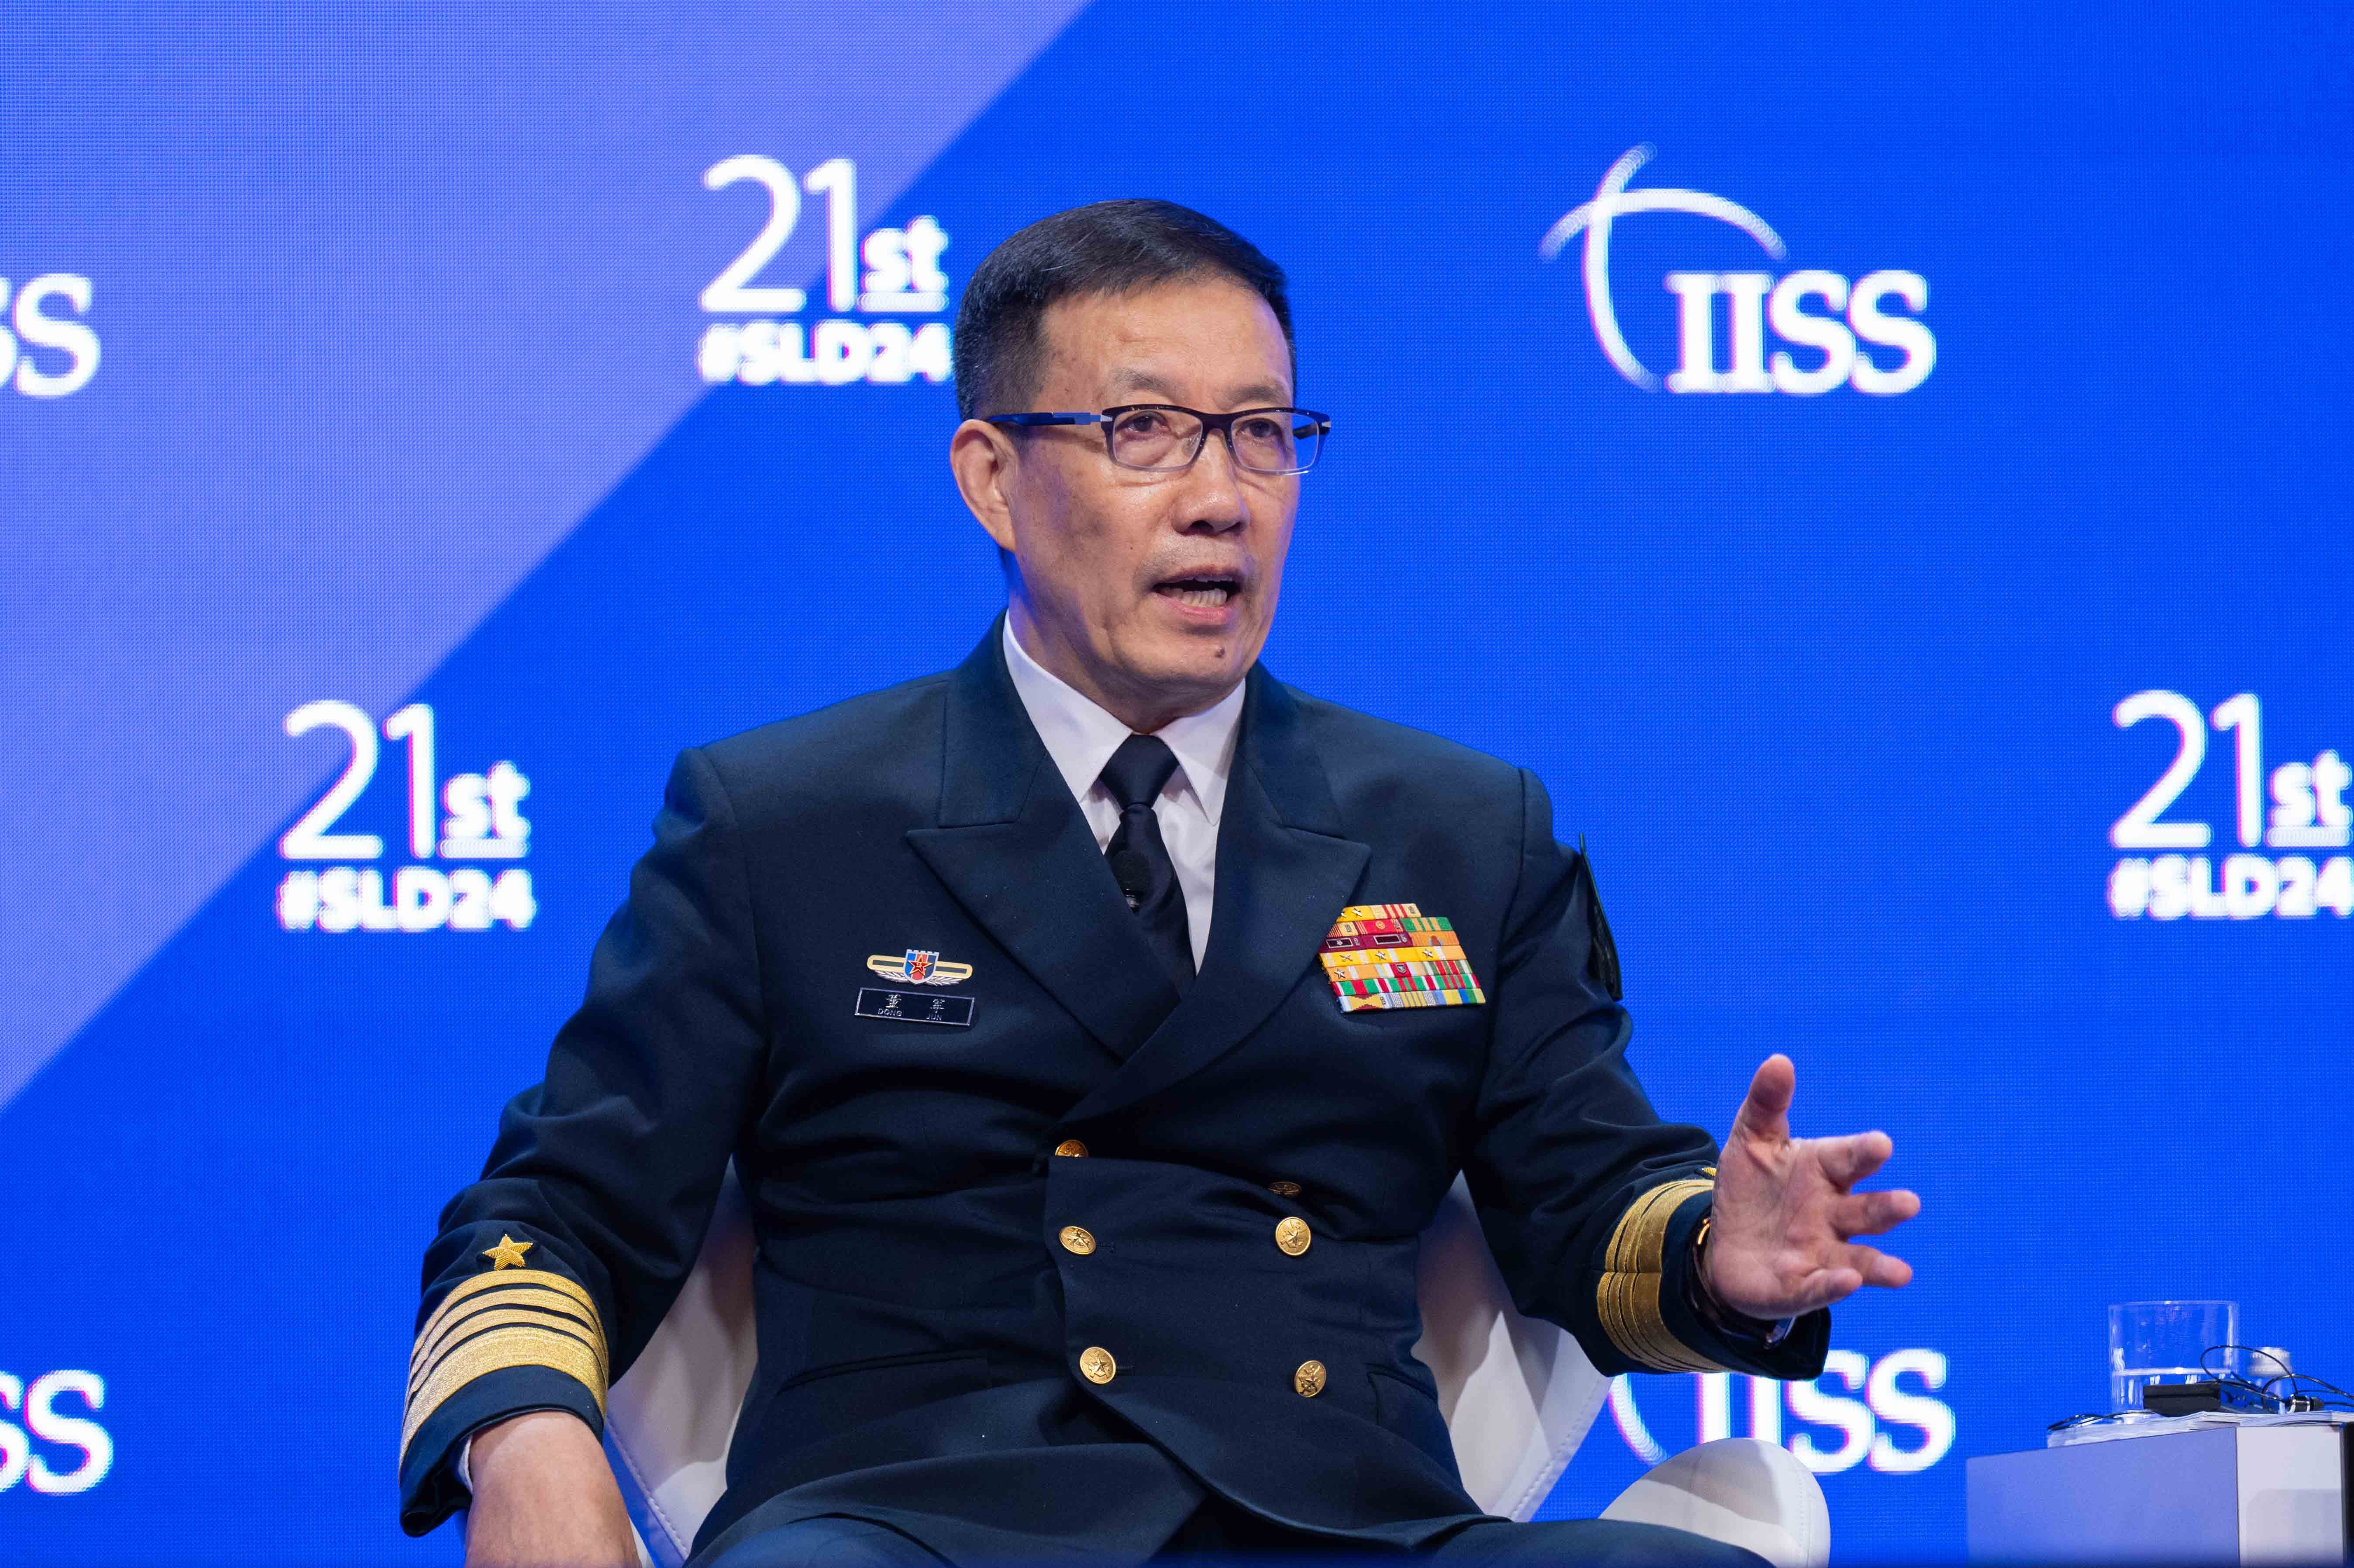 Admiral Dong Jun, China’s minister of defence, at the same conference as Mr Zelensky, denied that Beijing supported Russia’s war effort